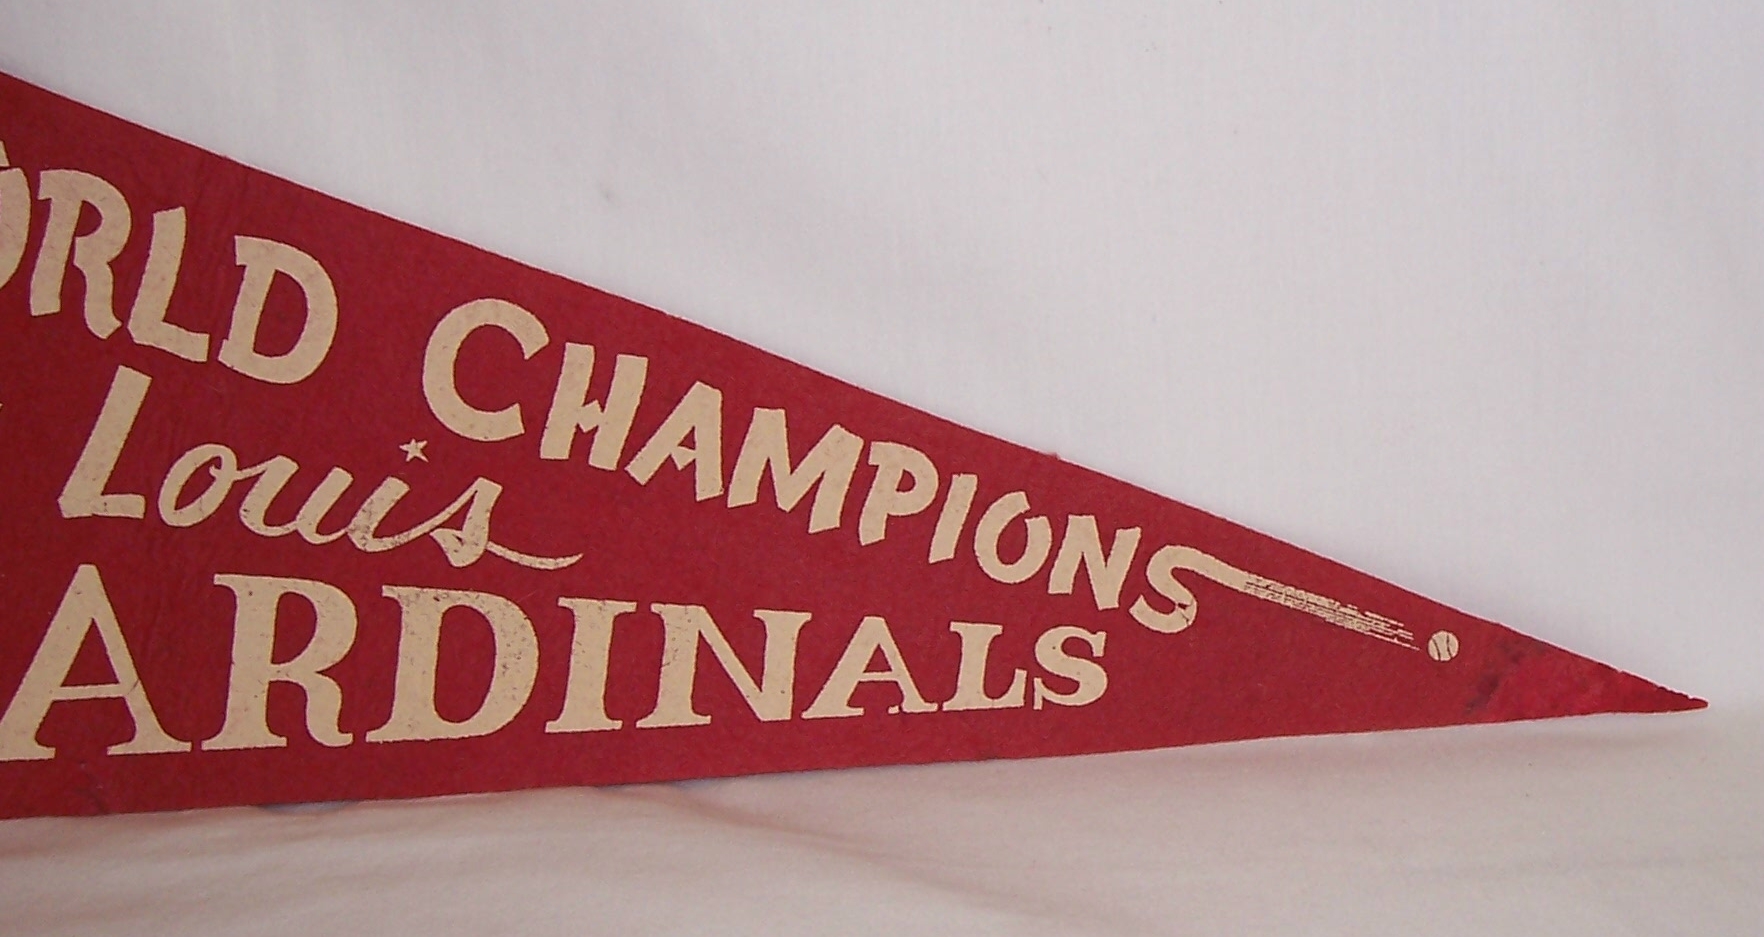  St. Louis Cardinals Heritage History Banner Pennant : Sports &  Outdoors